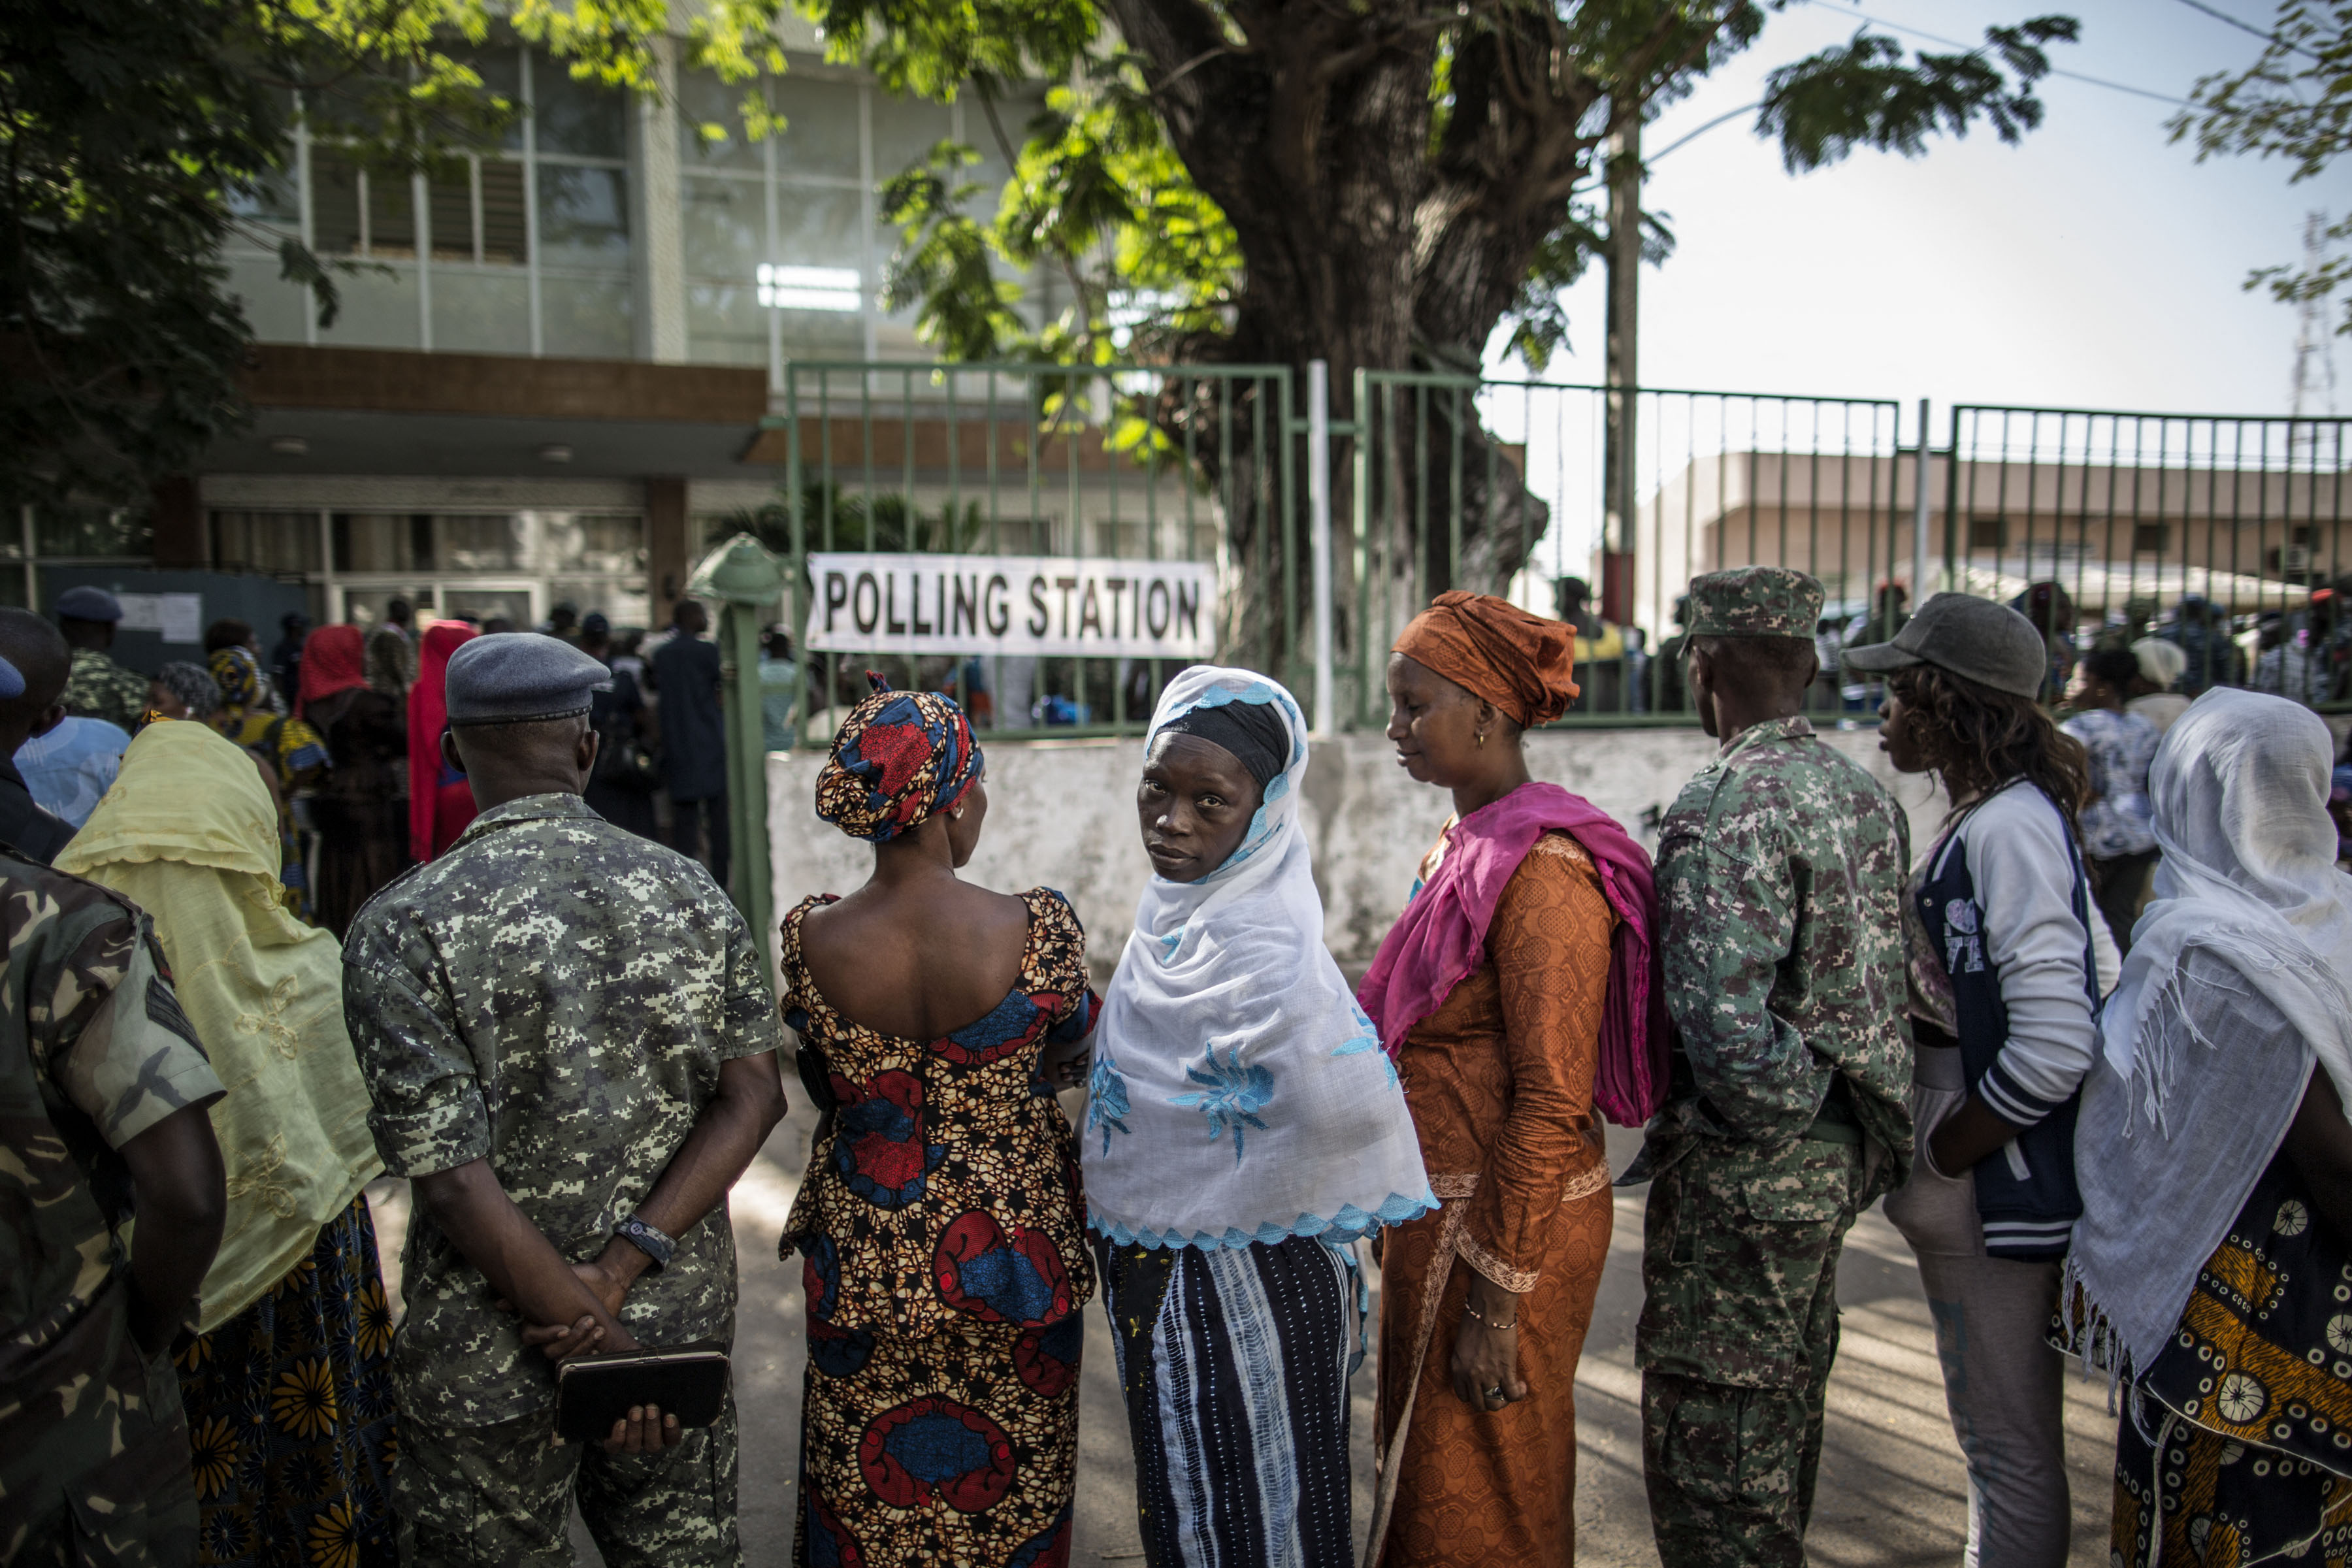 Voters queue at a polling station in Banjul, 1 December 2016, during presidential elections. (Photo by MARCO LONGARI/AFP via Getty Images).